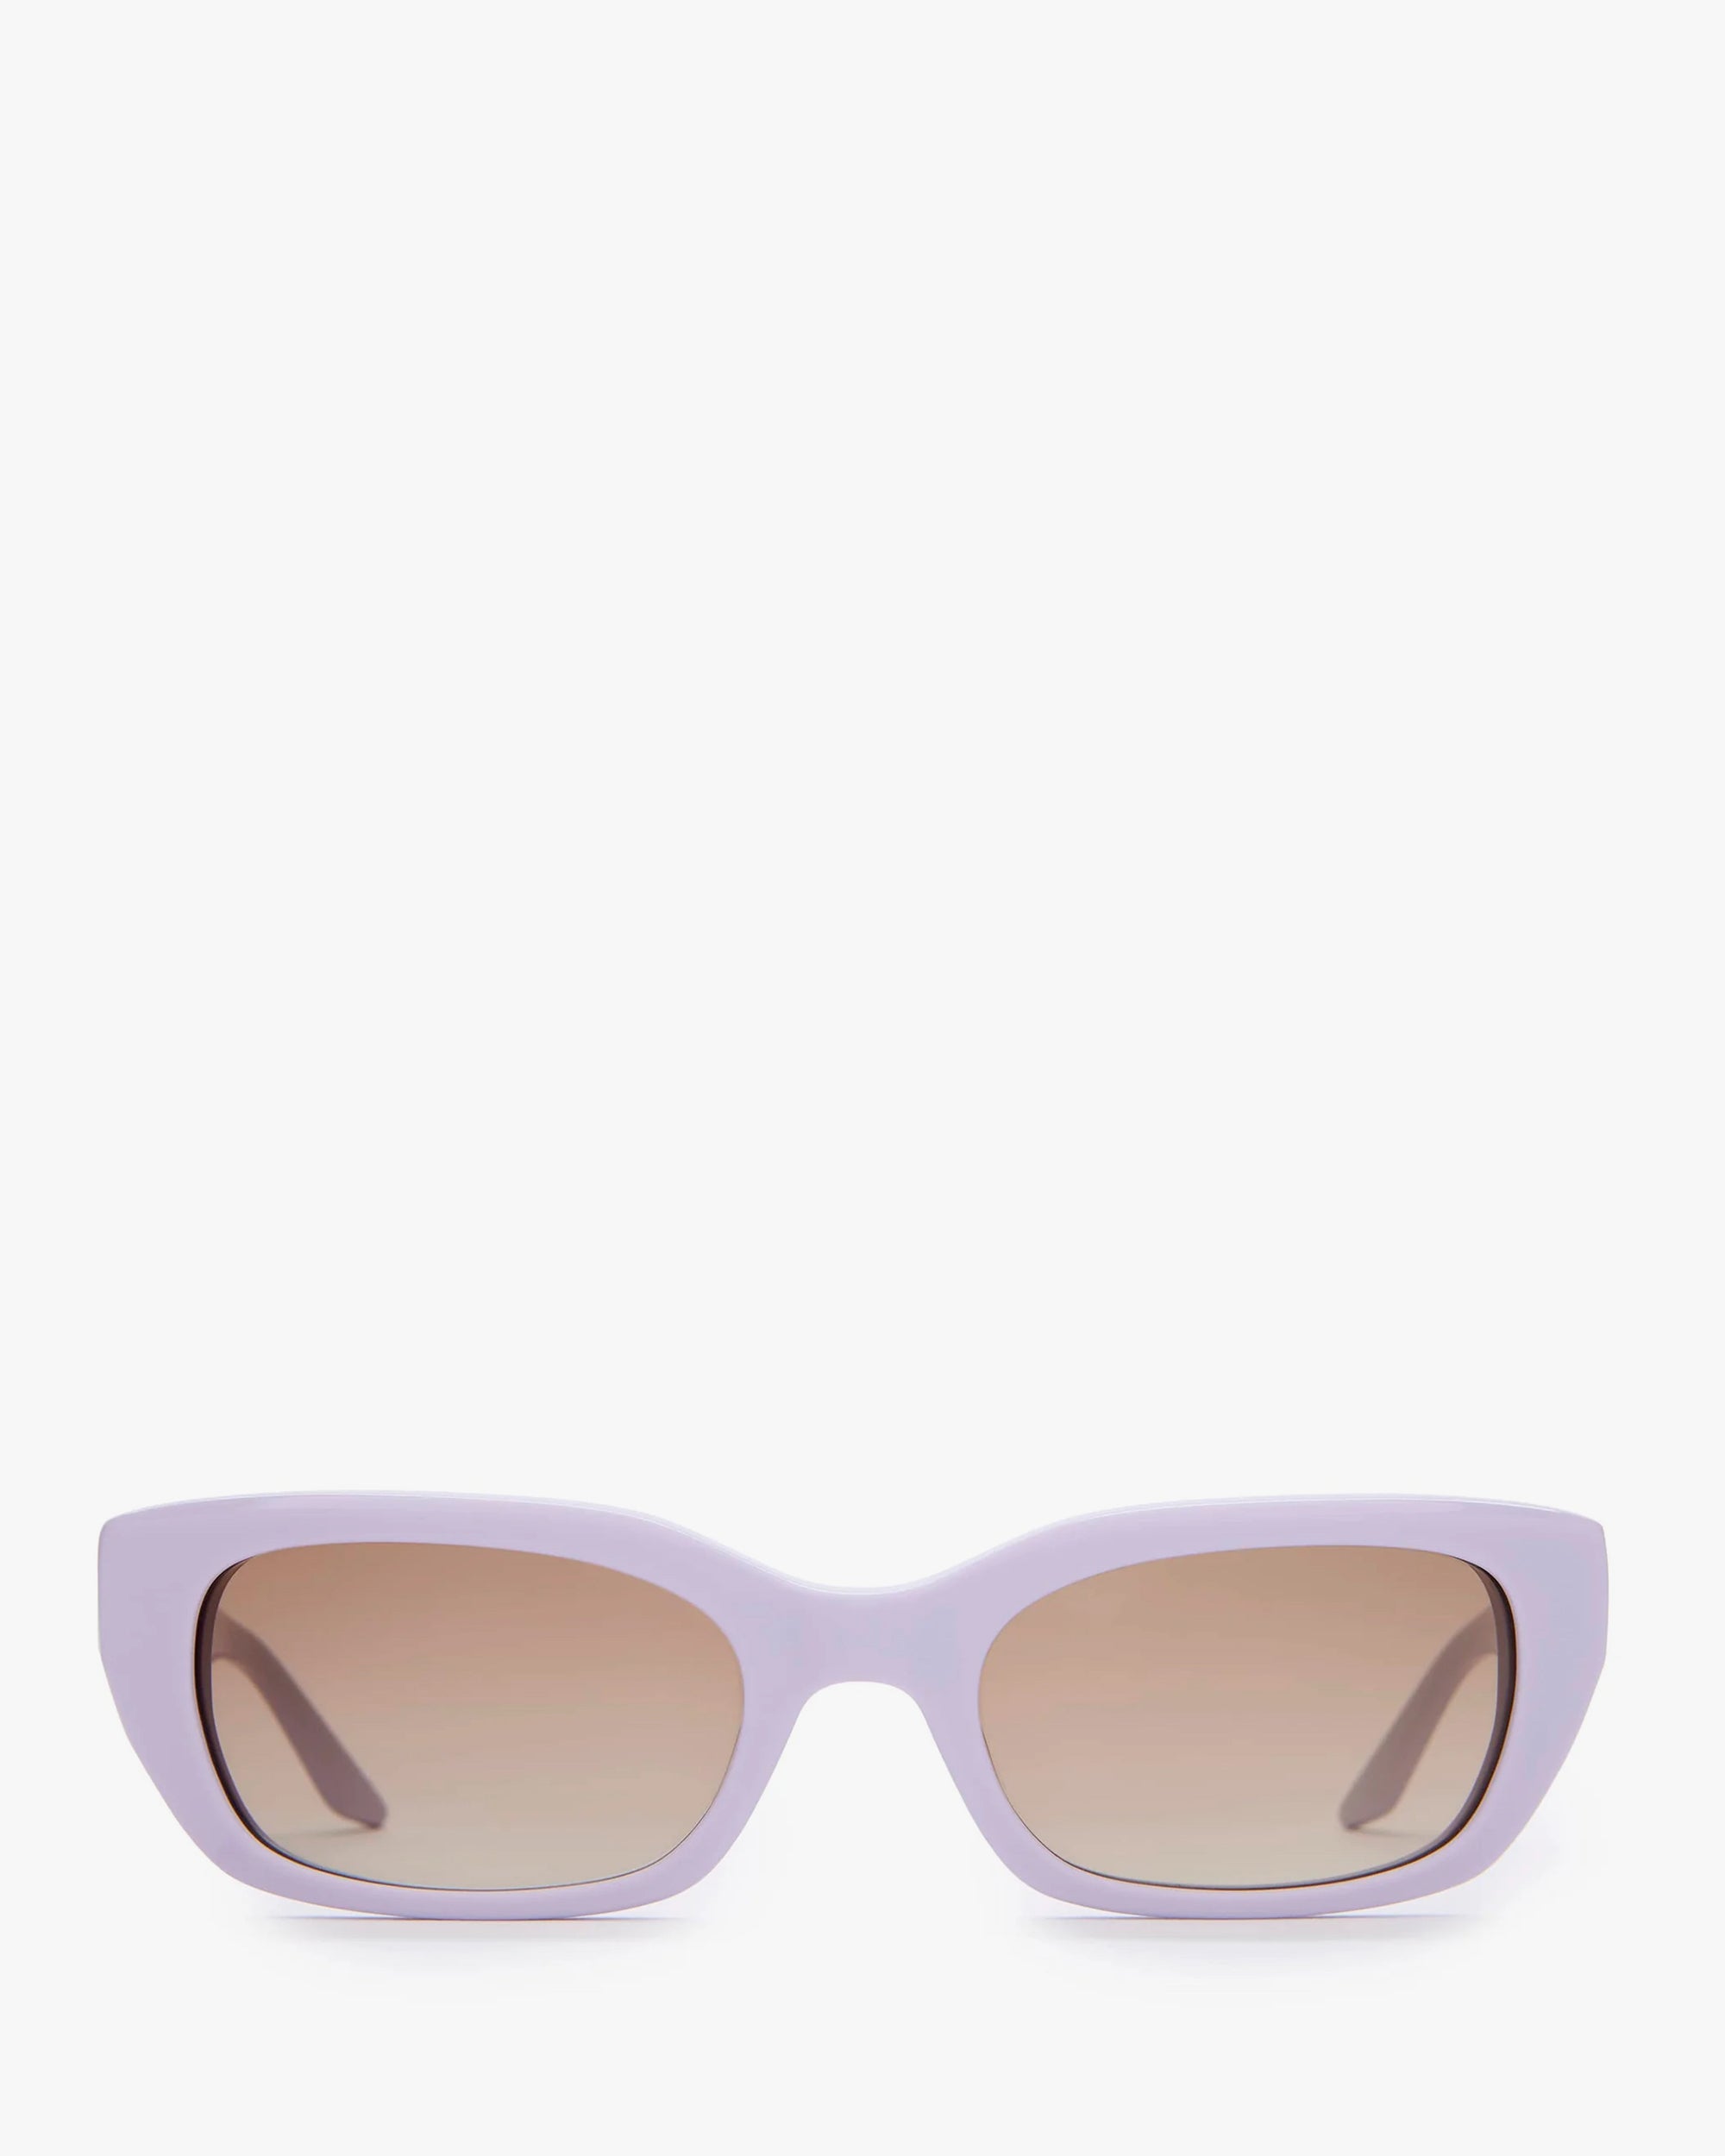 Black-Purple Louis Vuitton Glasses - Shades - Shades By Sweets